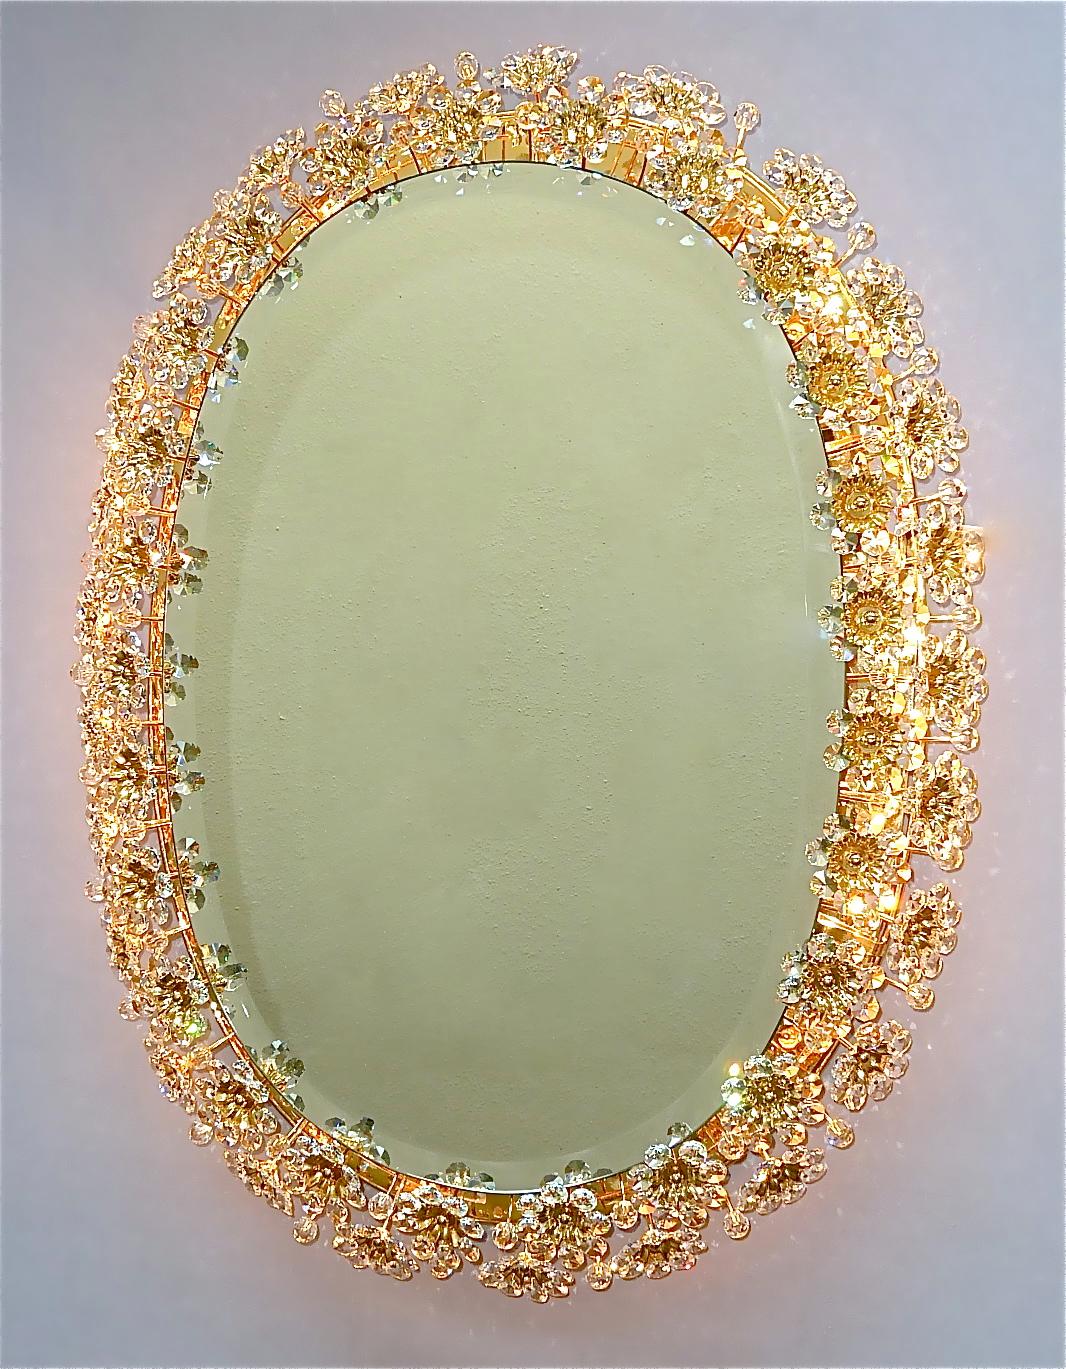 Large oval flower bouquet gilt brass metal crystal glass backlit wall mirror made by Palwa, Germany circa 1960-1970. The frame has lots of beautiful hand-cut faceted crystals in the shape of flowers or blossoms which sparkle like diamonds. The